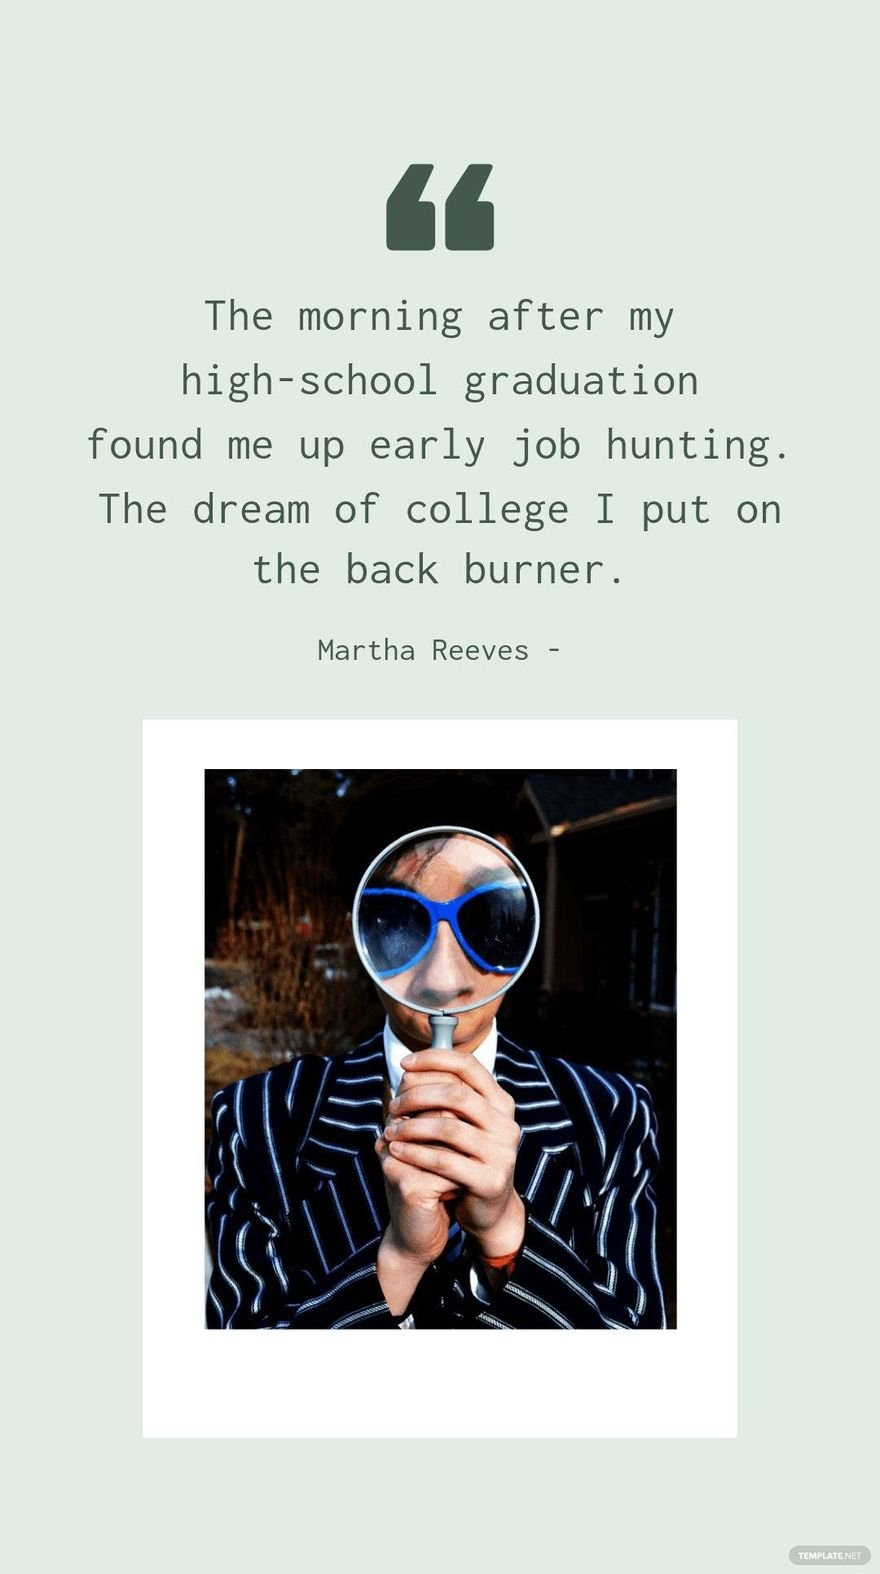 Martha Reeves - The morning after my high-school graduation found me up early job hunting. The dream of college I put on the back burner.